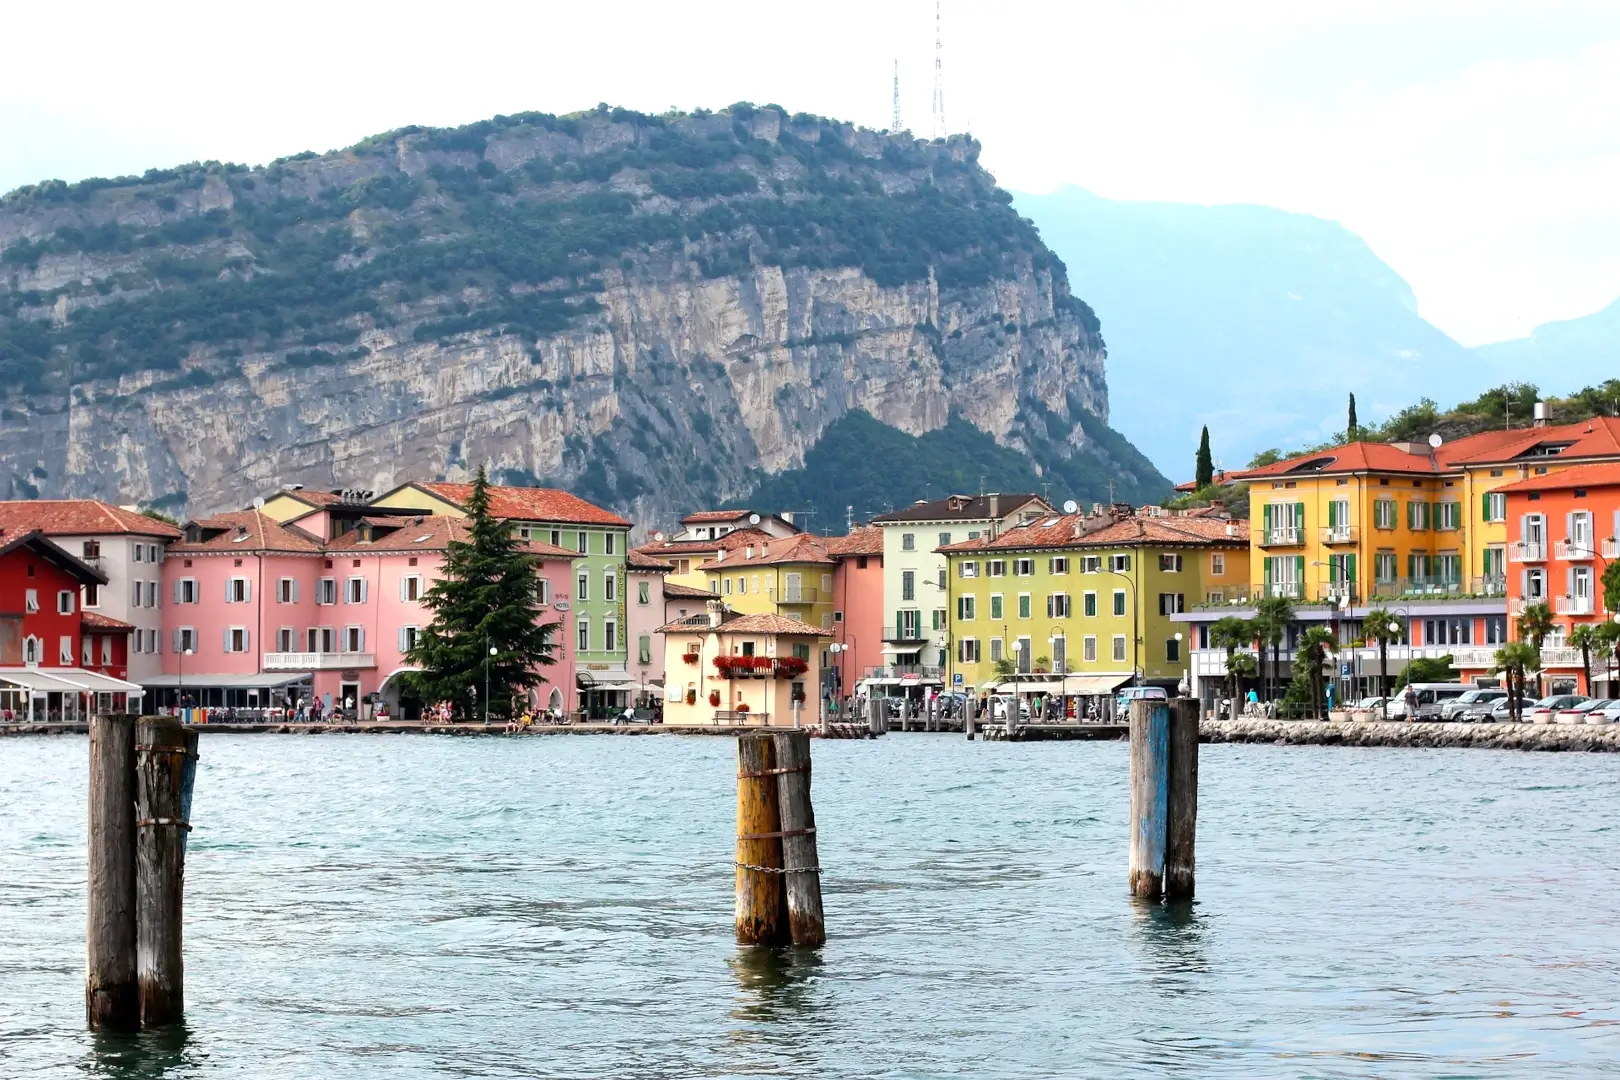 THINGS TO DO AND SEE IN TORBOLE